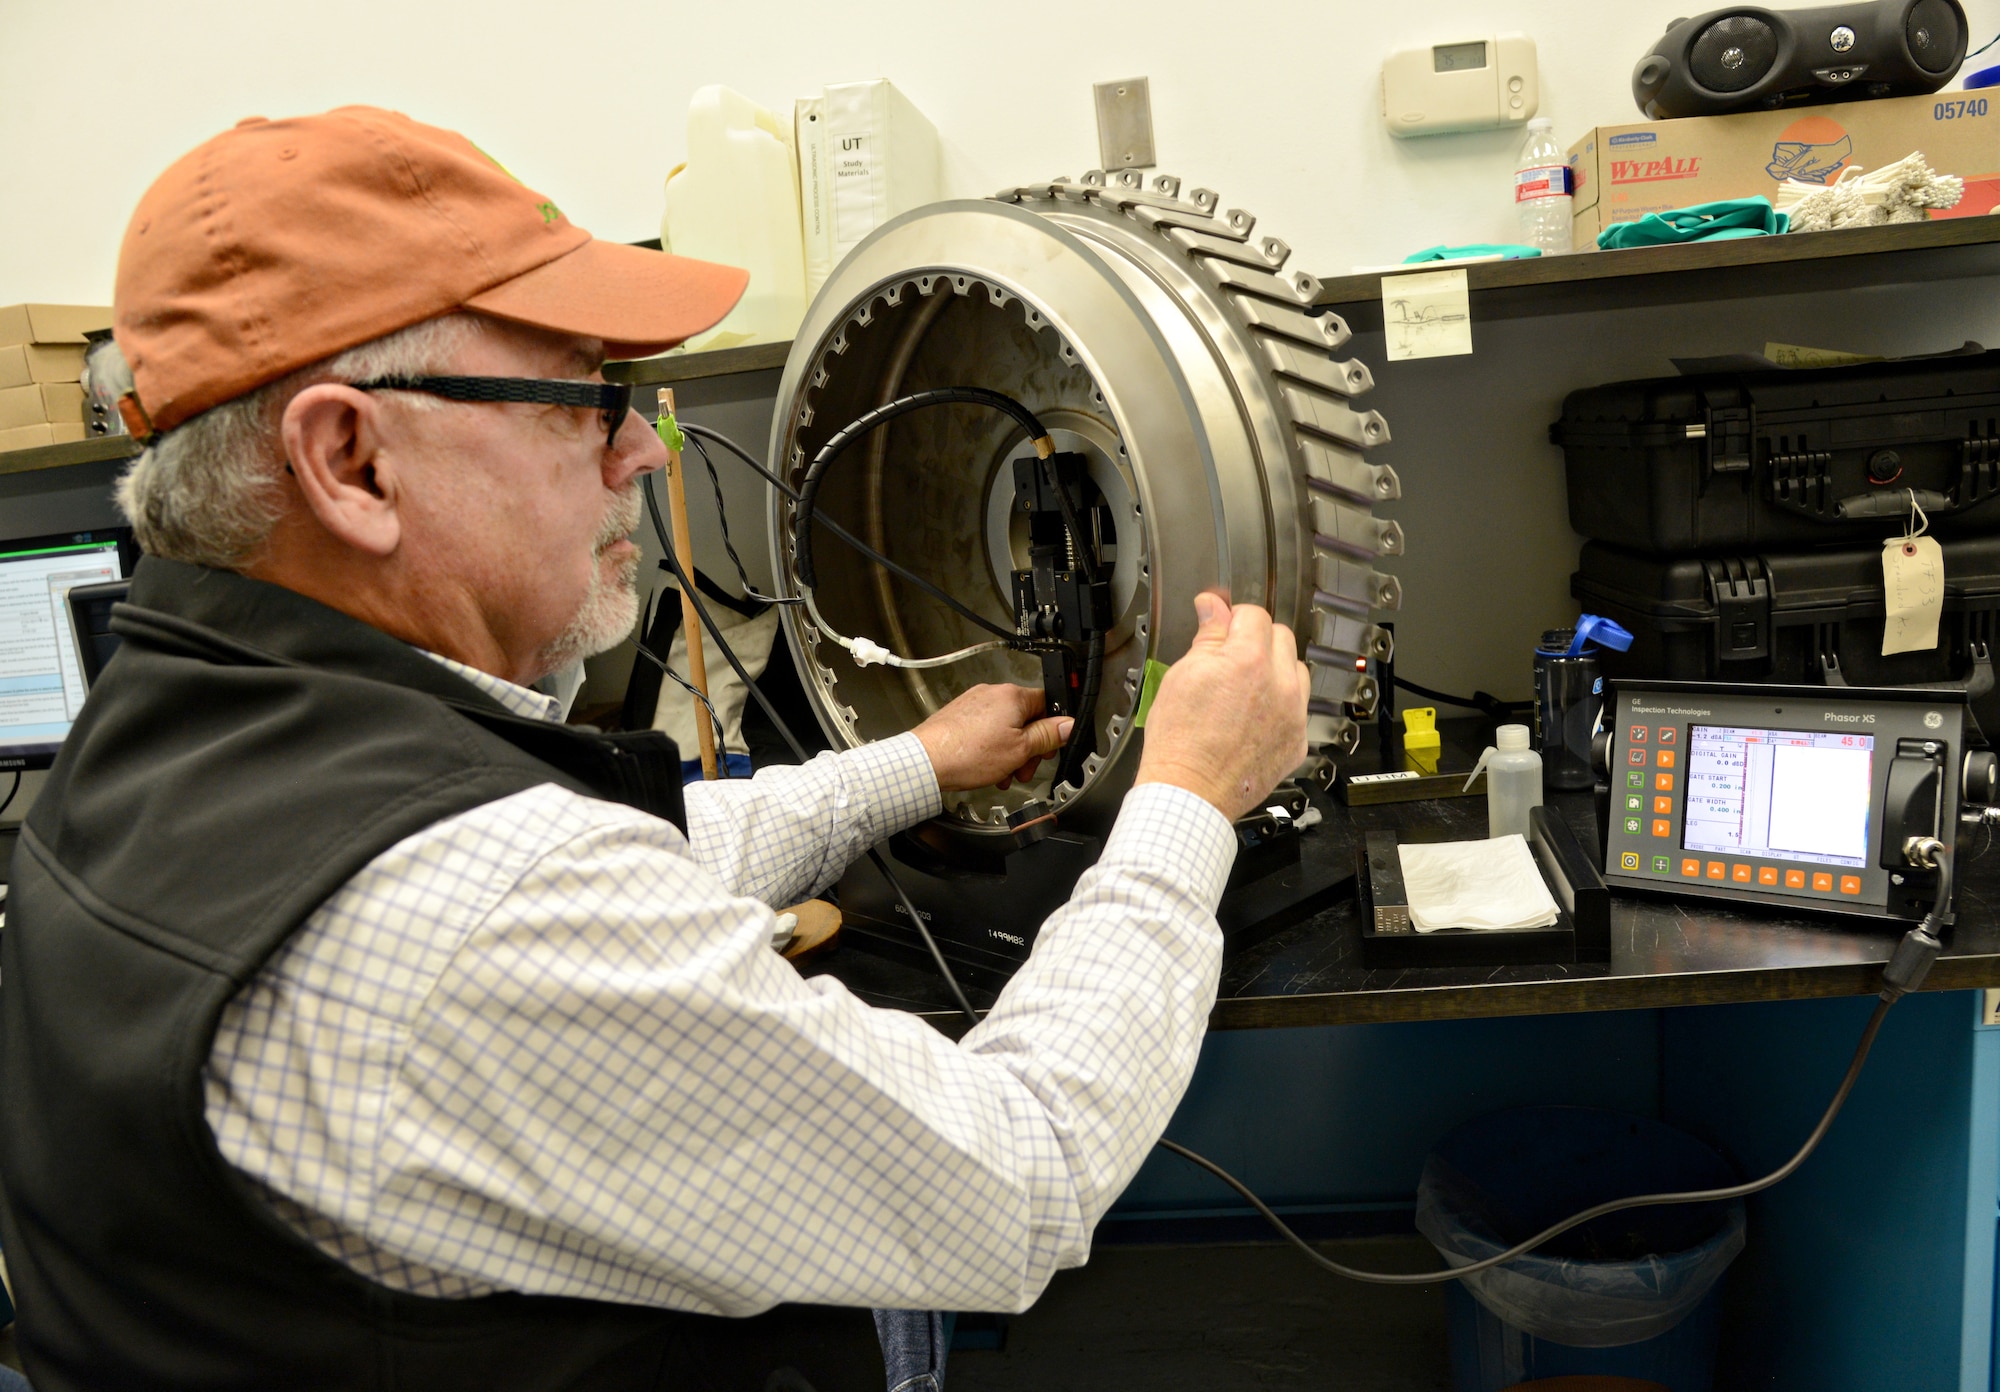 Steve Guinn, the work leader for Eddy Current and Ultrasonic inspections, performs a Phasor Ray inspection on a second stage fan disk for the F110 engine. Ultrasonic sound waves from the ray helps amplify the sound of a compromise, or a crack, in the part. (Air Force photo by Kelly White/Released)